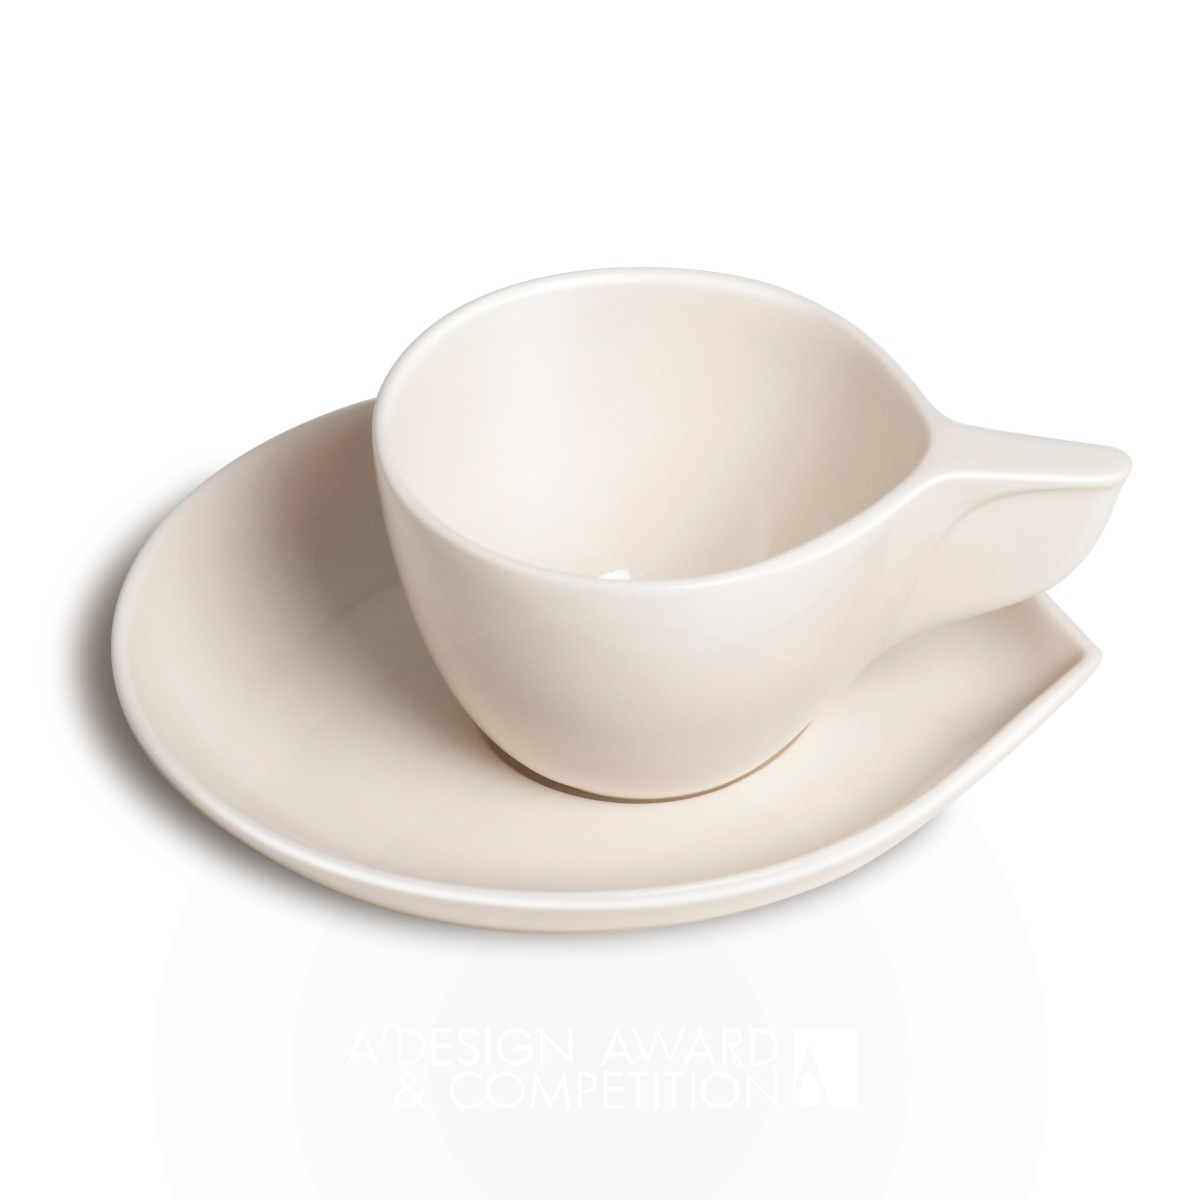 Cappuccino set Porcelain cup and saucer by Etienne Carignan